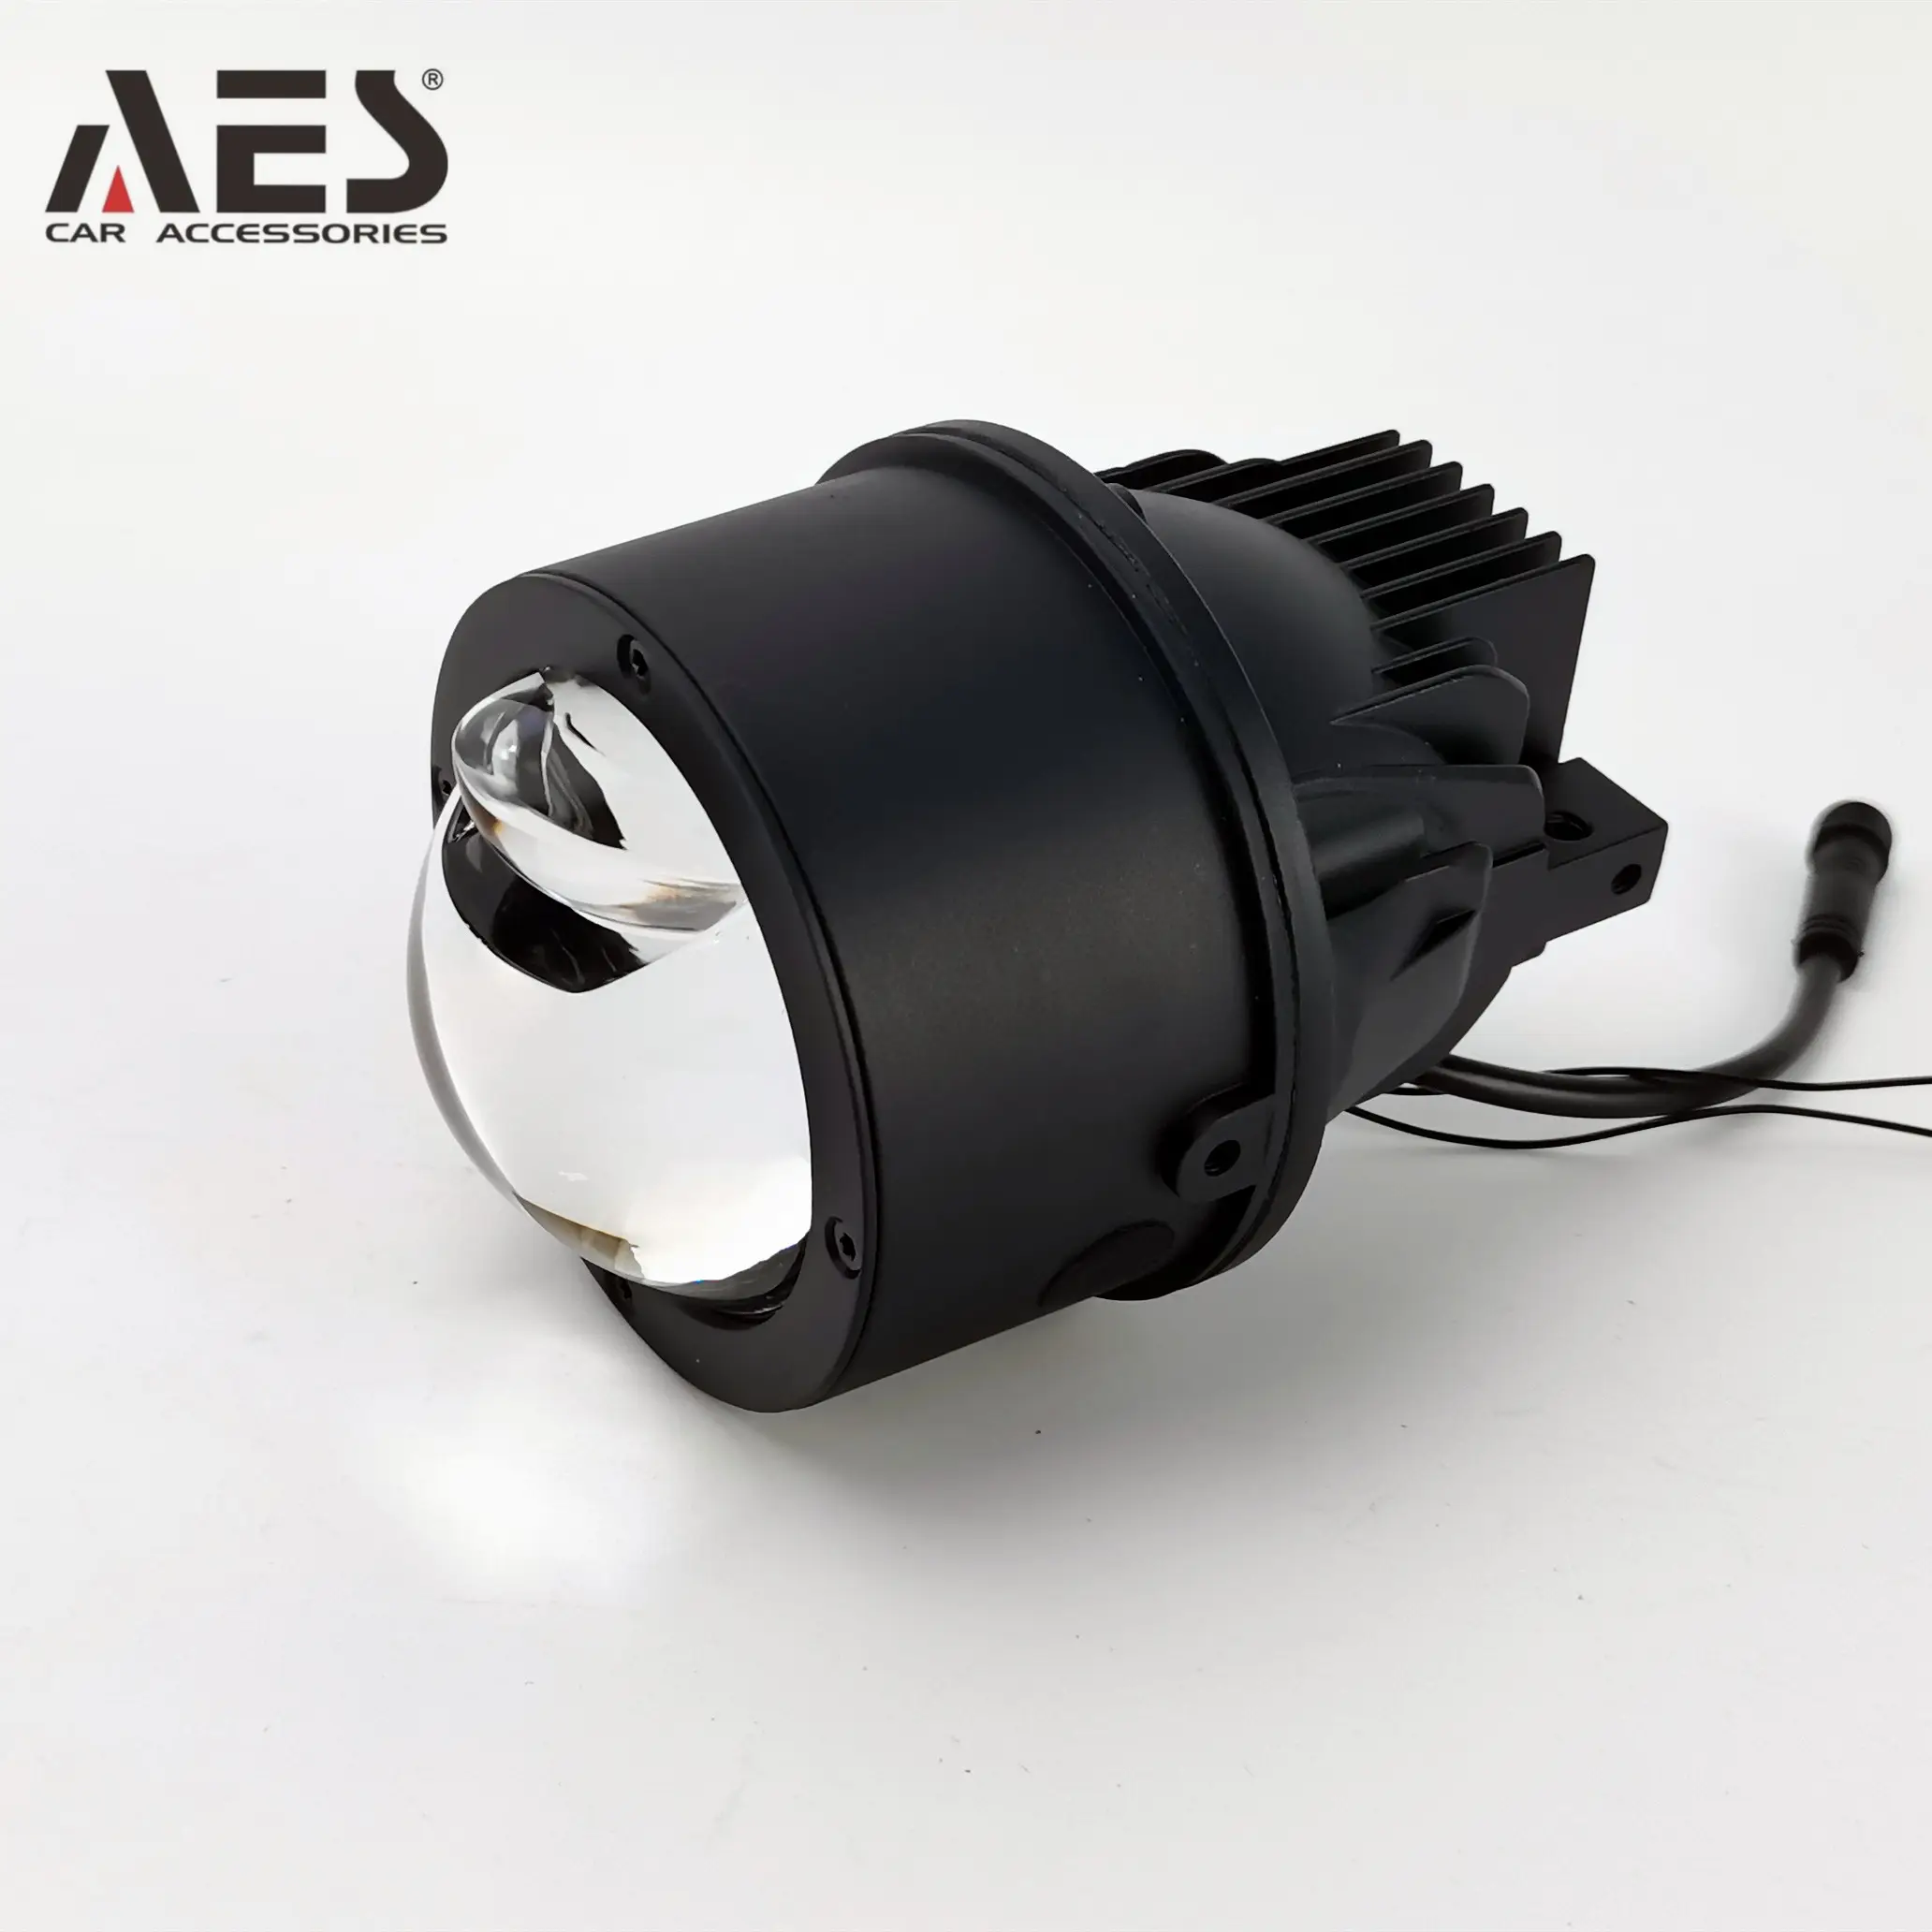 2022 New Arrival Q8 pro Bi Led Fog Light Projector Lens car accessories for all cars auto lighting system